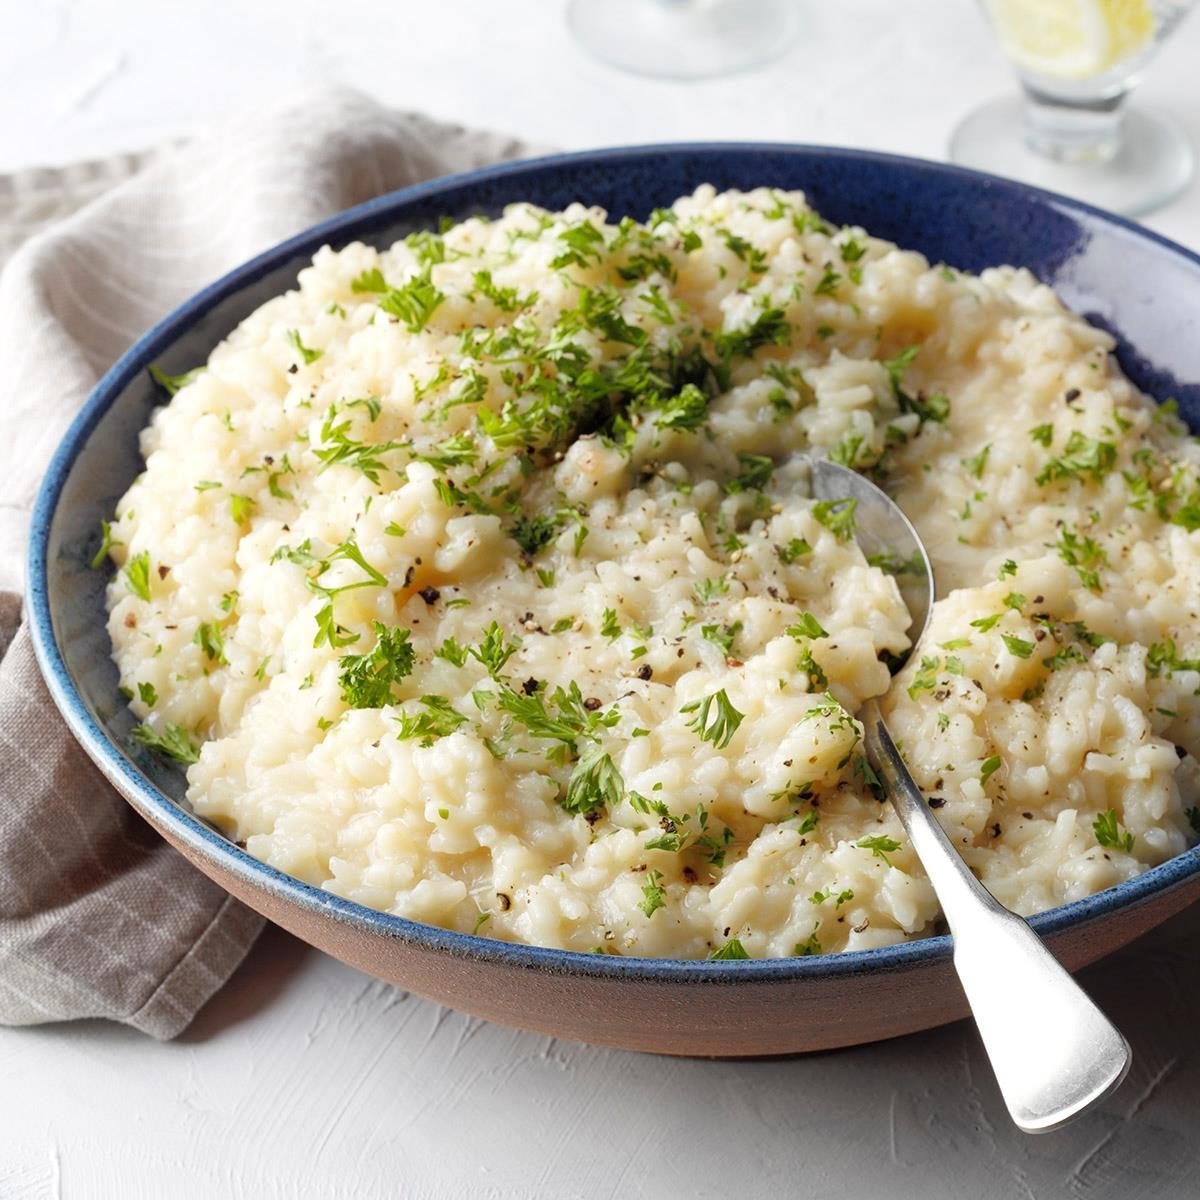 Parmesan Risotto Recipe: How to Make It